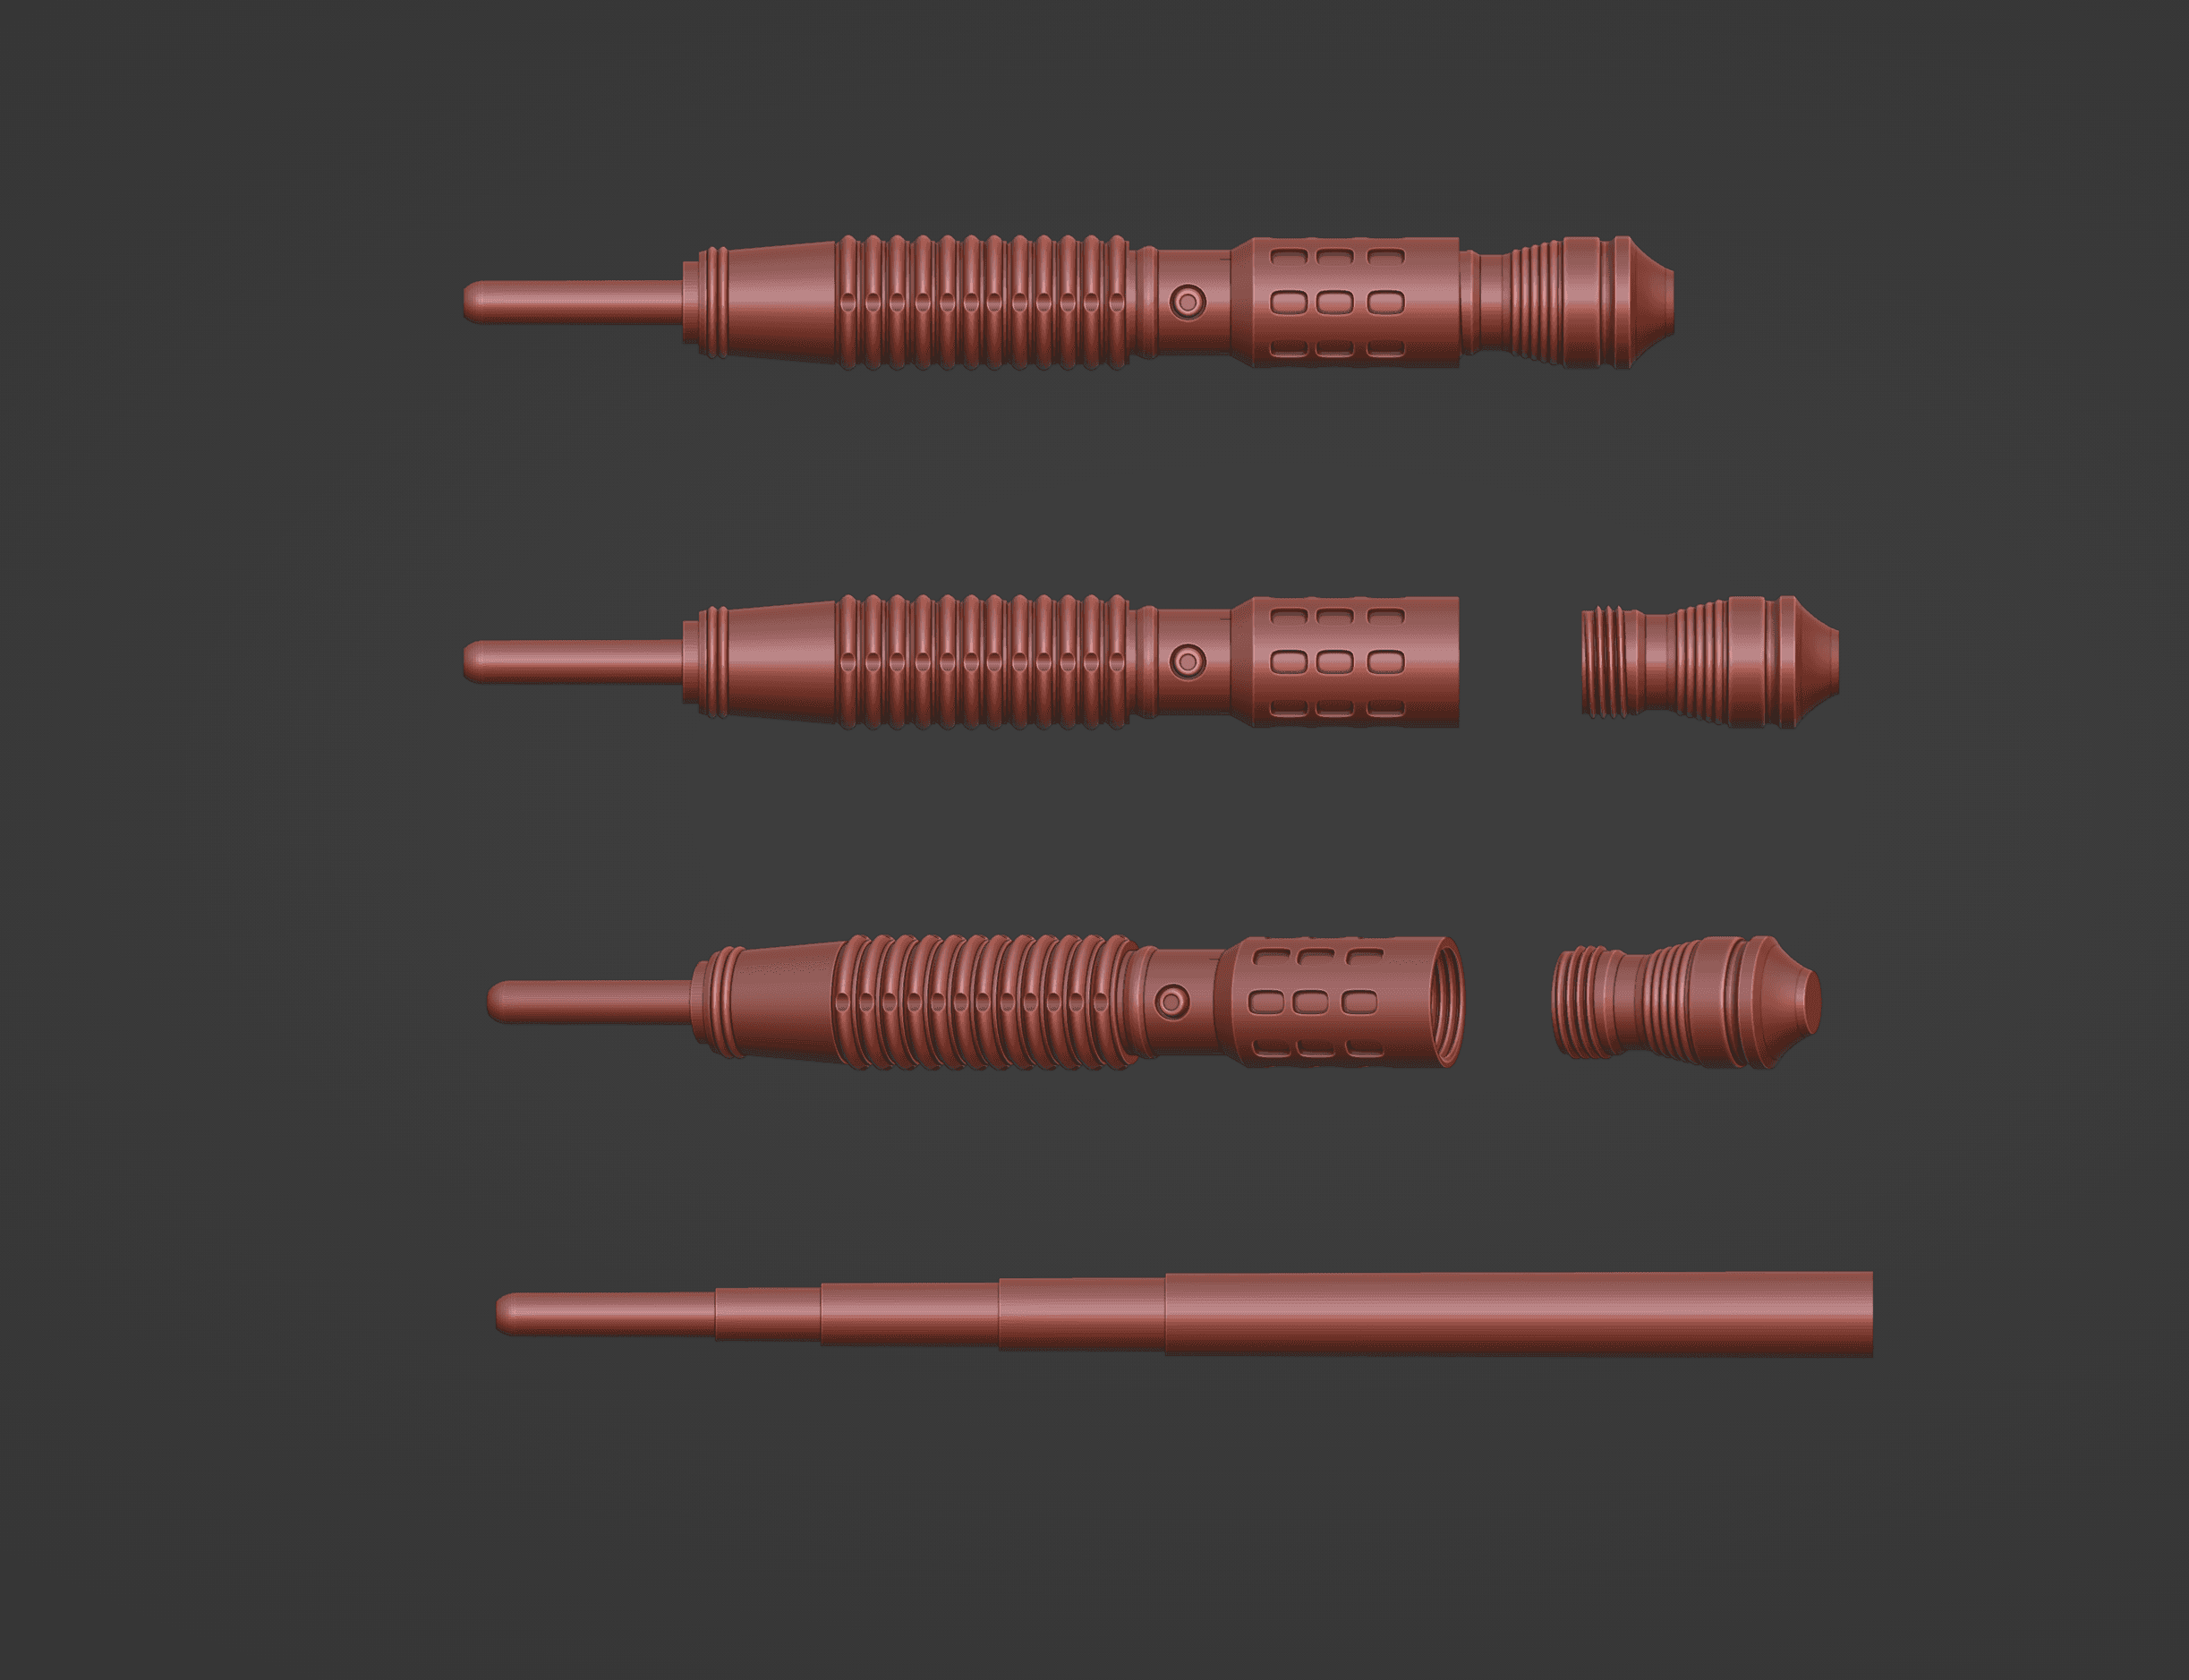 Print in Place Collapsing Jedi Lightsaber Concept 3 3d model